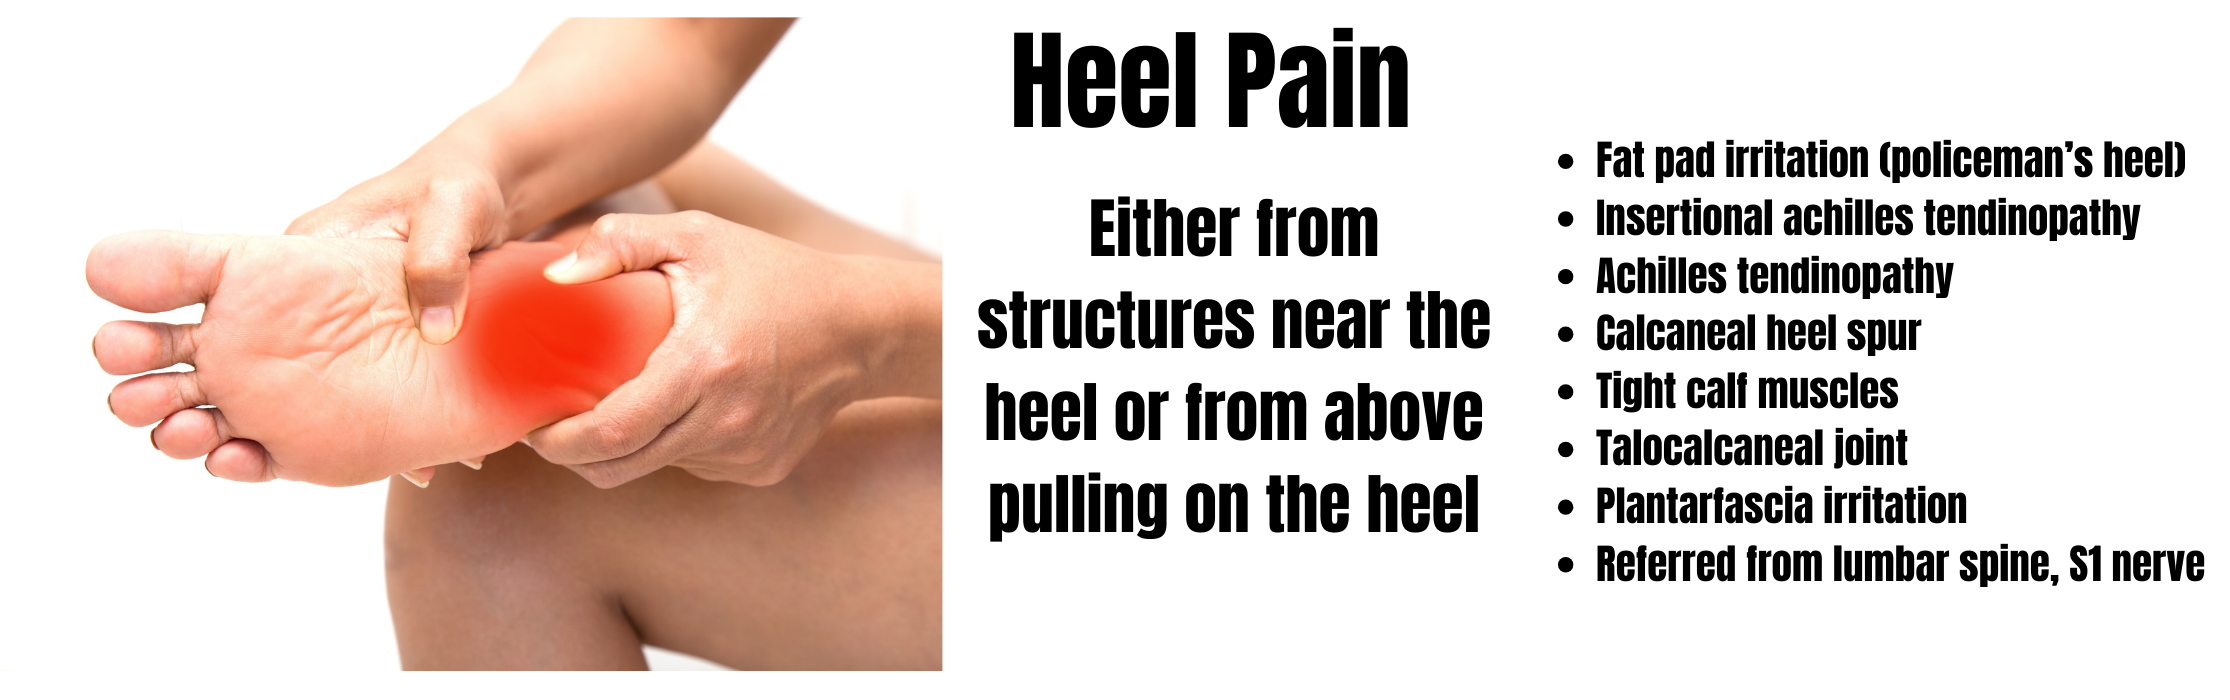 Heel pain possible causes